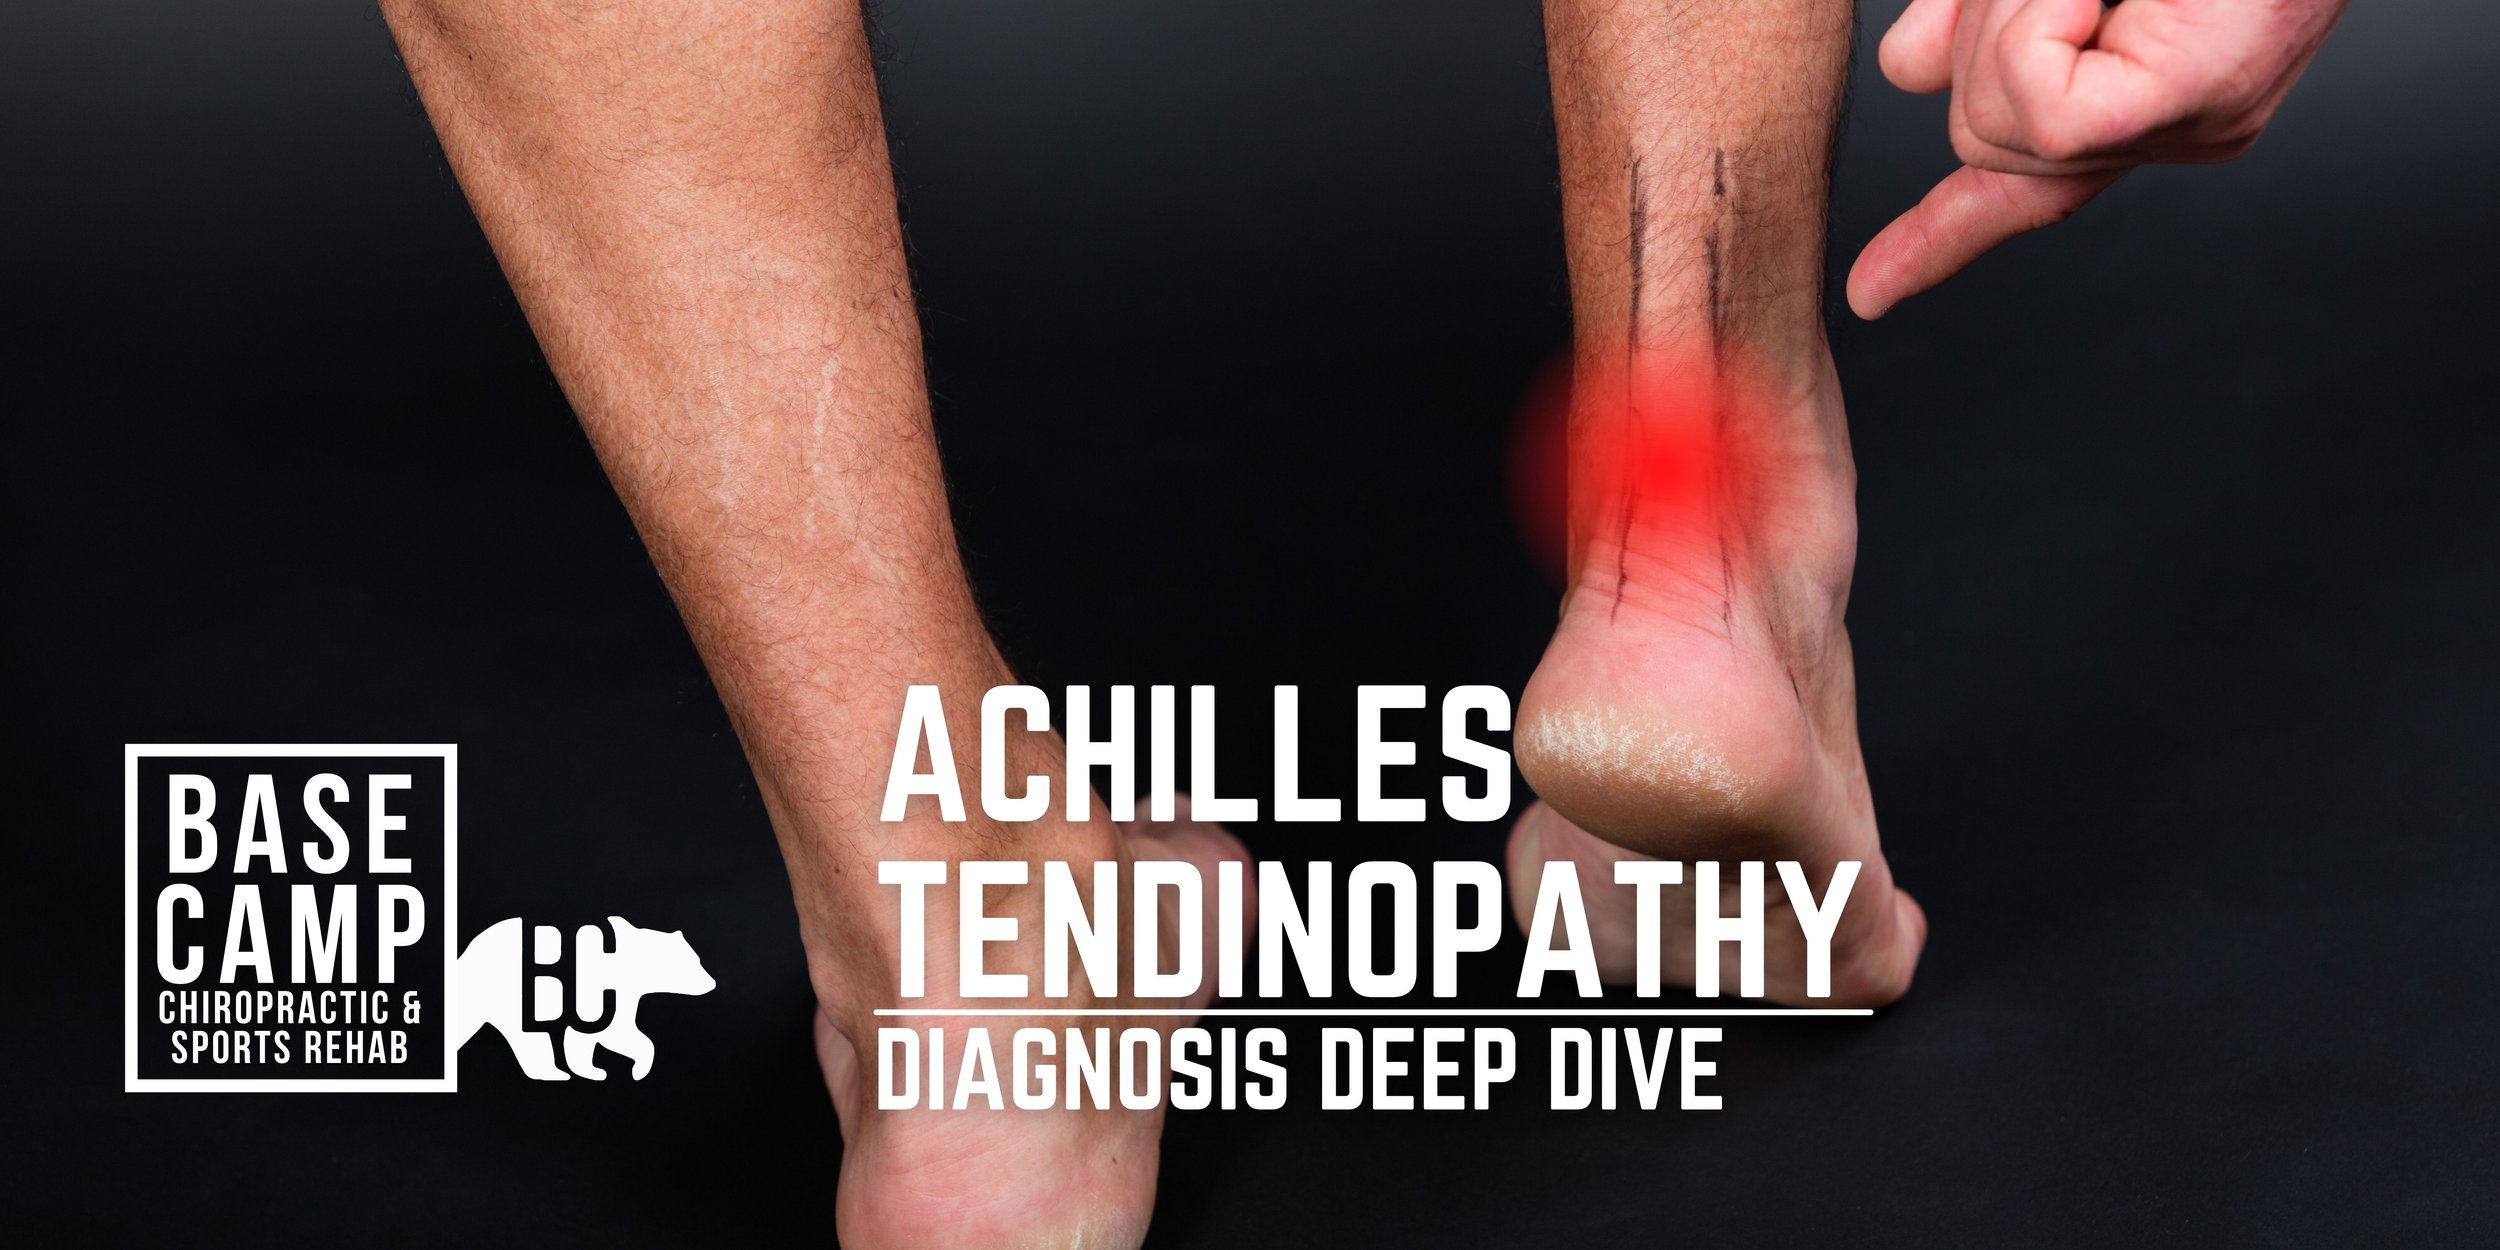 Why is the Achilles tendon so fragile? - How to keep your Achilles safe